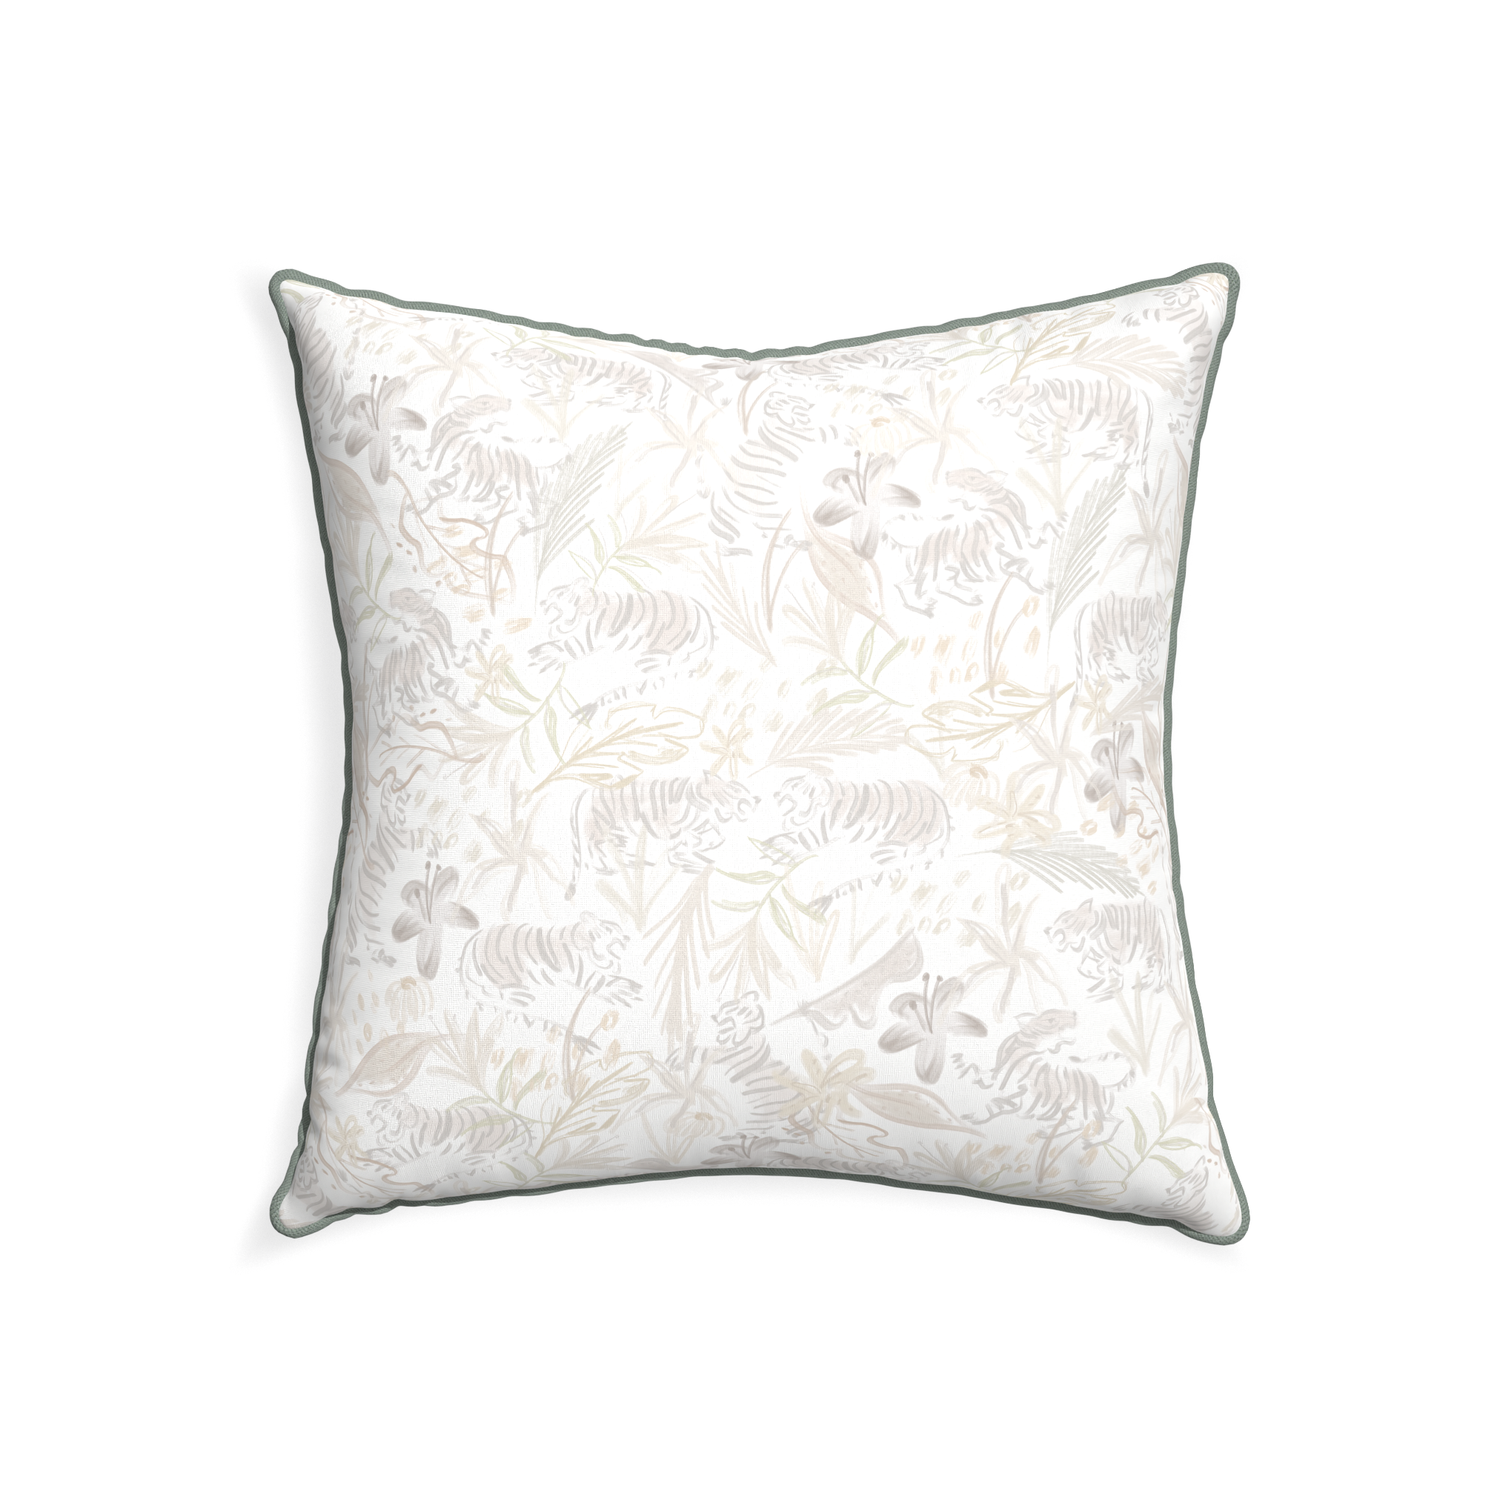 22-square frida sand custom beige chinoiserie tigerpillow with sage piping on white background